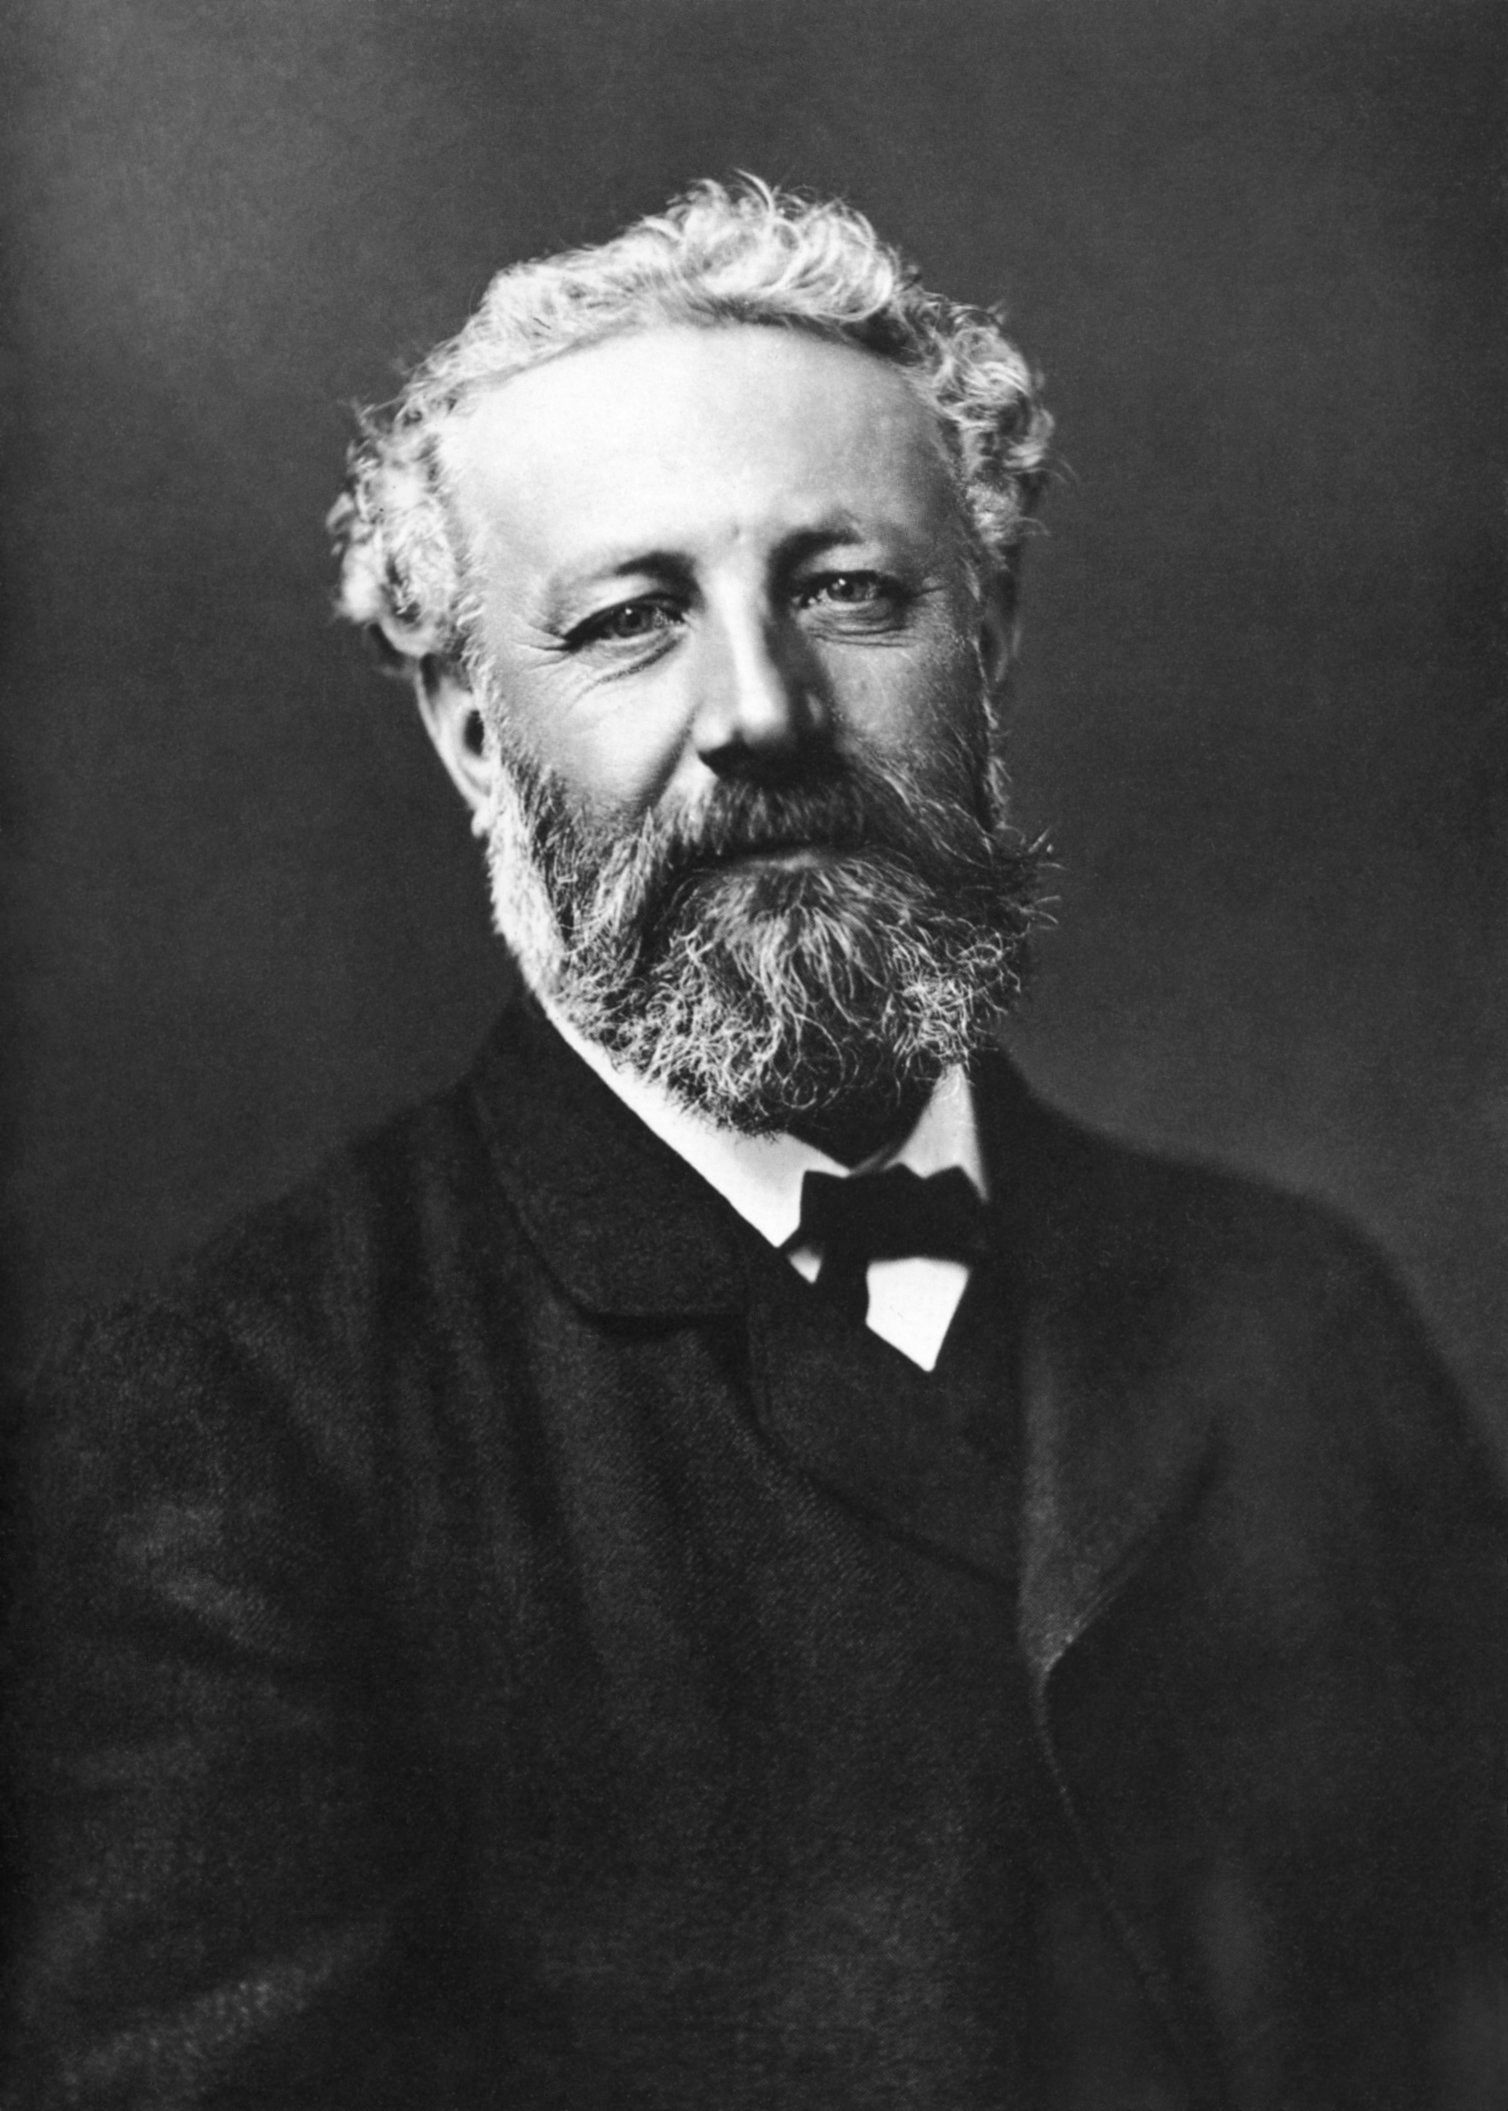 Jules Verne (1828 – 1905) was born in Nantes, France and wrote ...